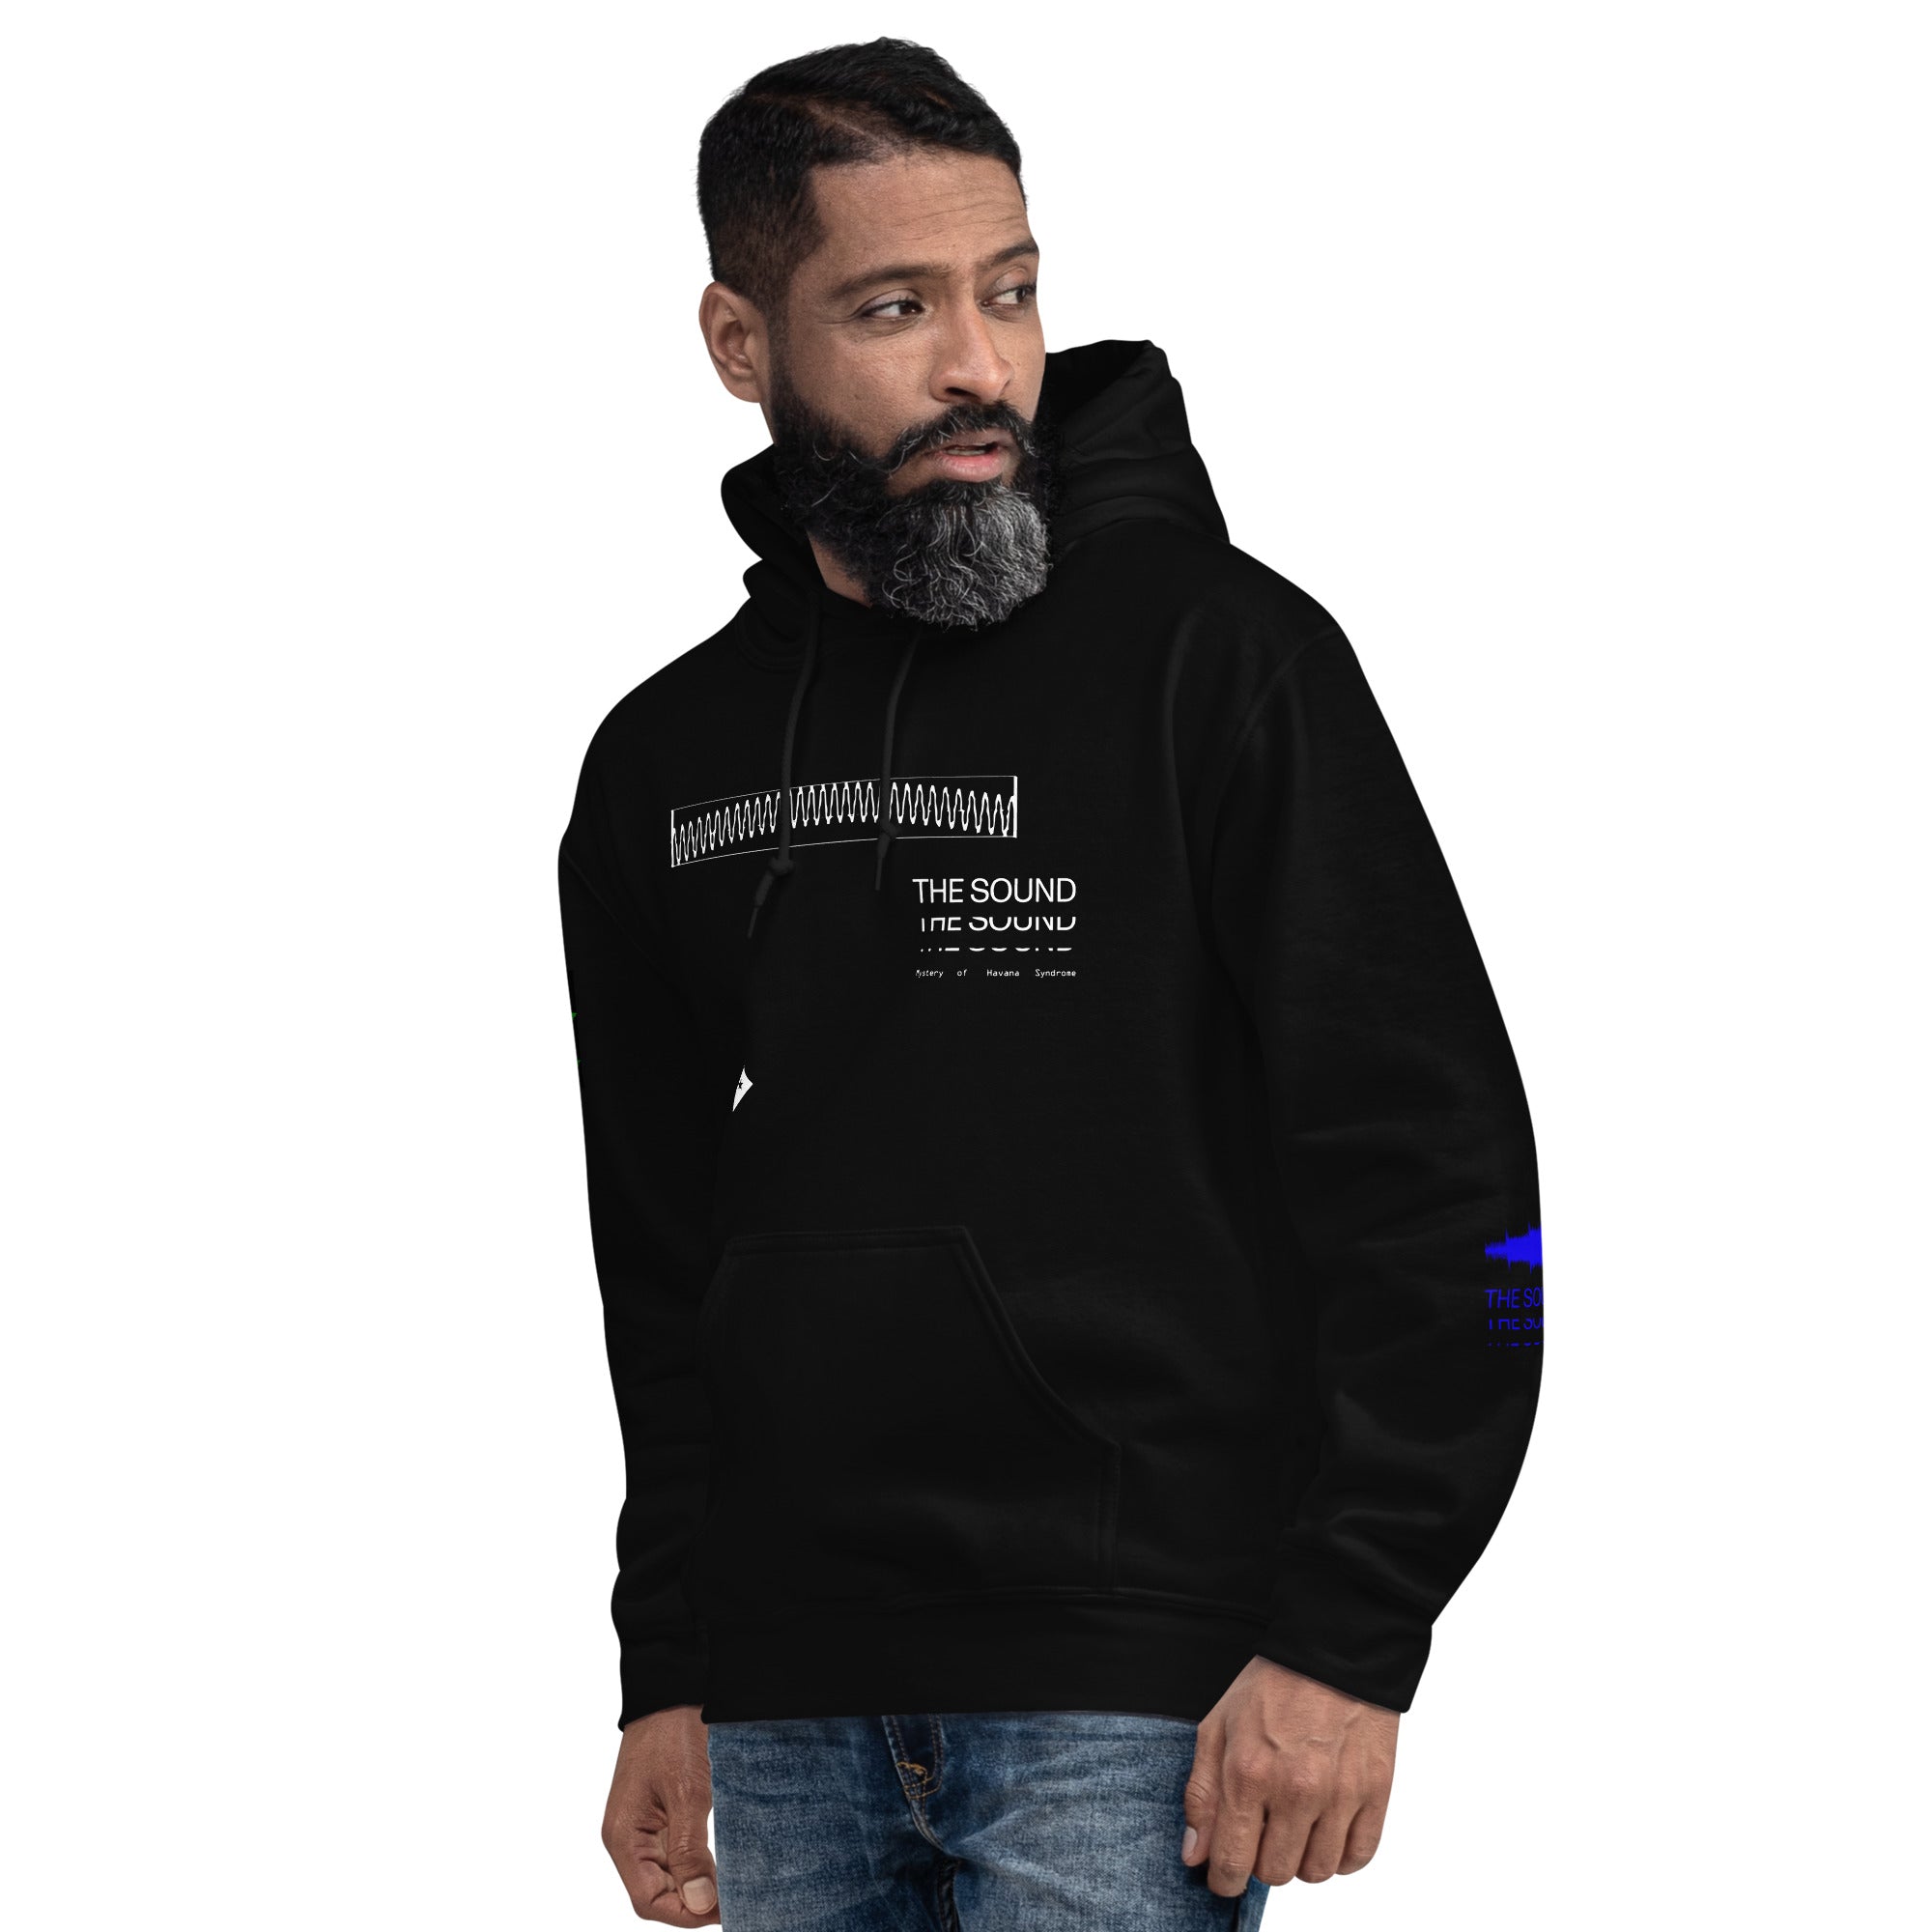 The Sound Hoodie